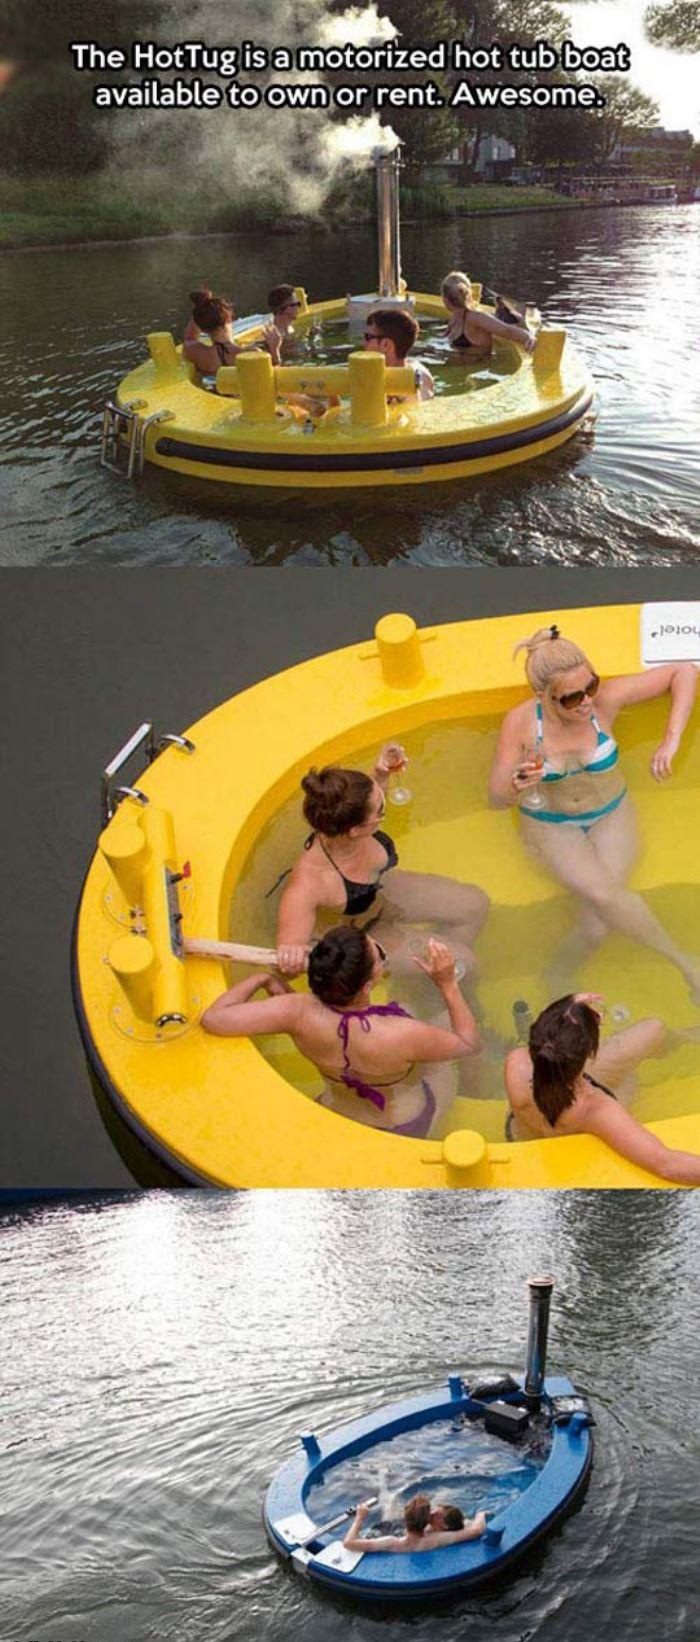 water transportation - The HotTug is a motorized hot tub boat available to own or rent. Awesome. 104